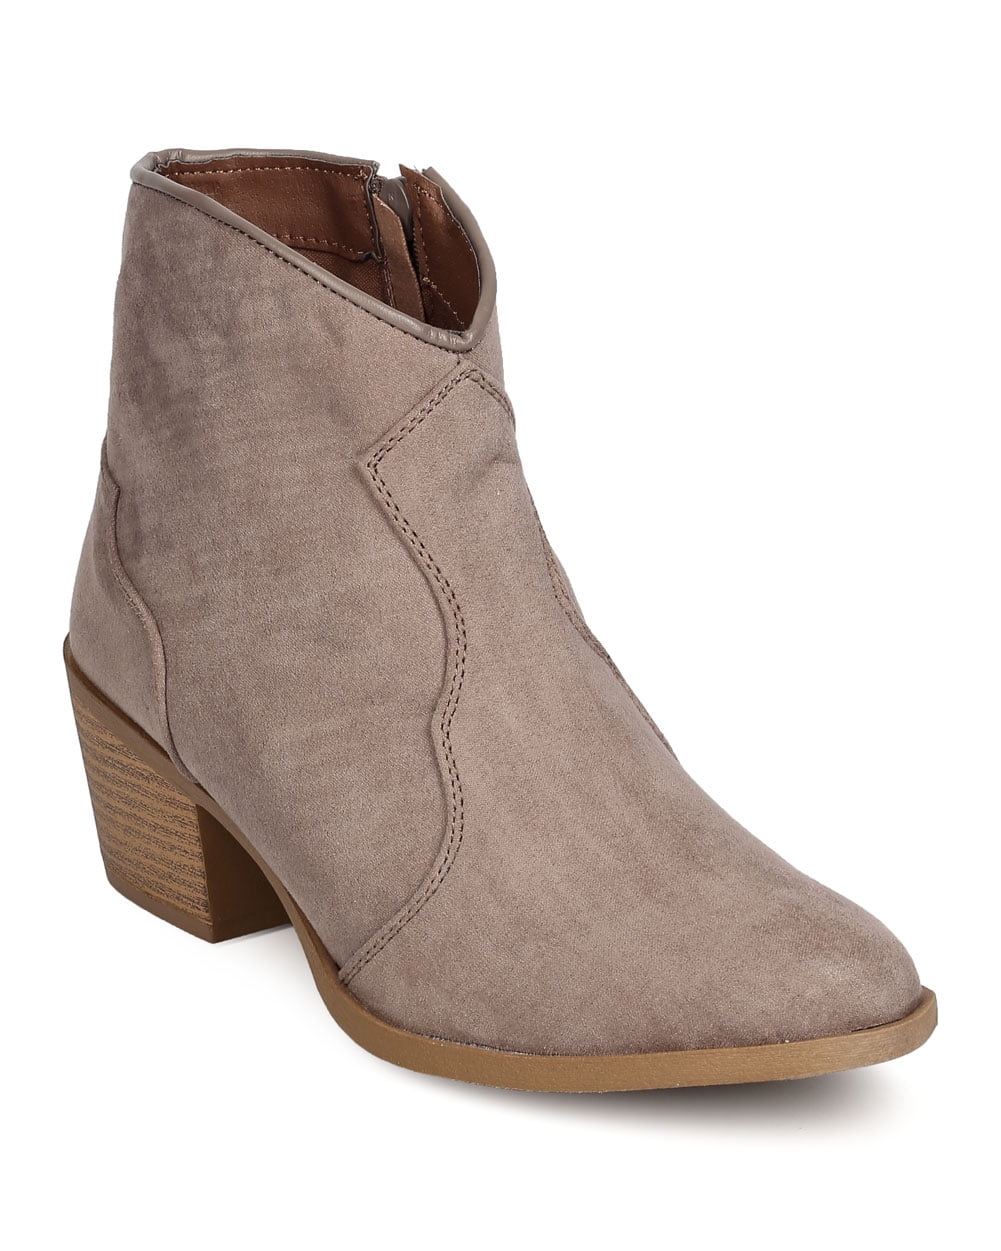 New Women Qupid Rover-15 Faux Suede Pointy Toe Cowboy Bootie - Walmart.com